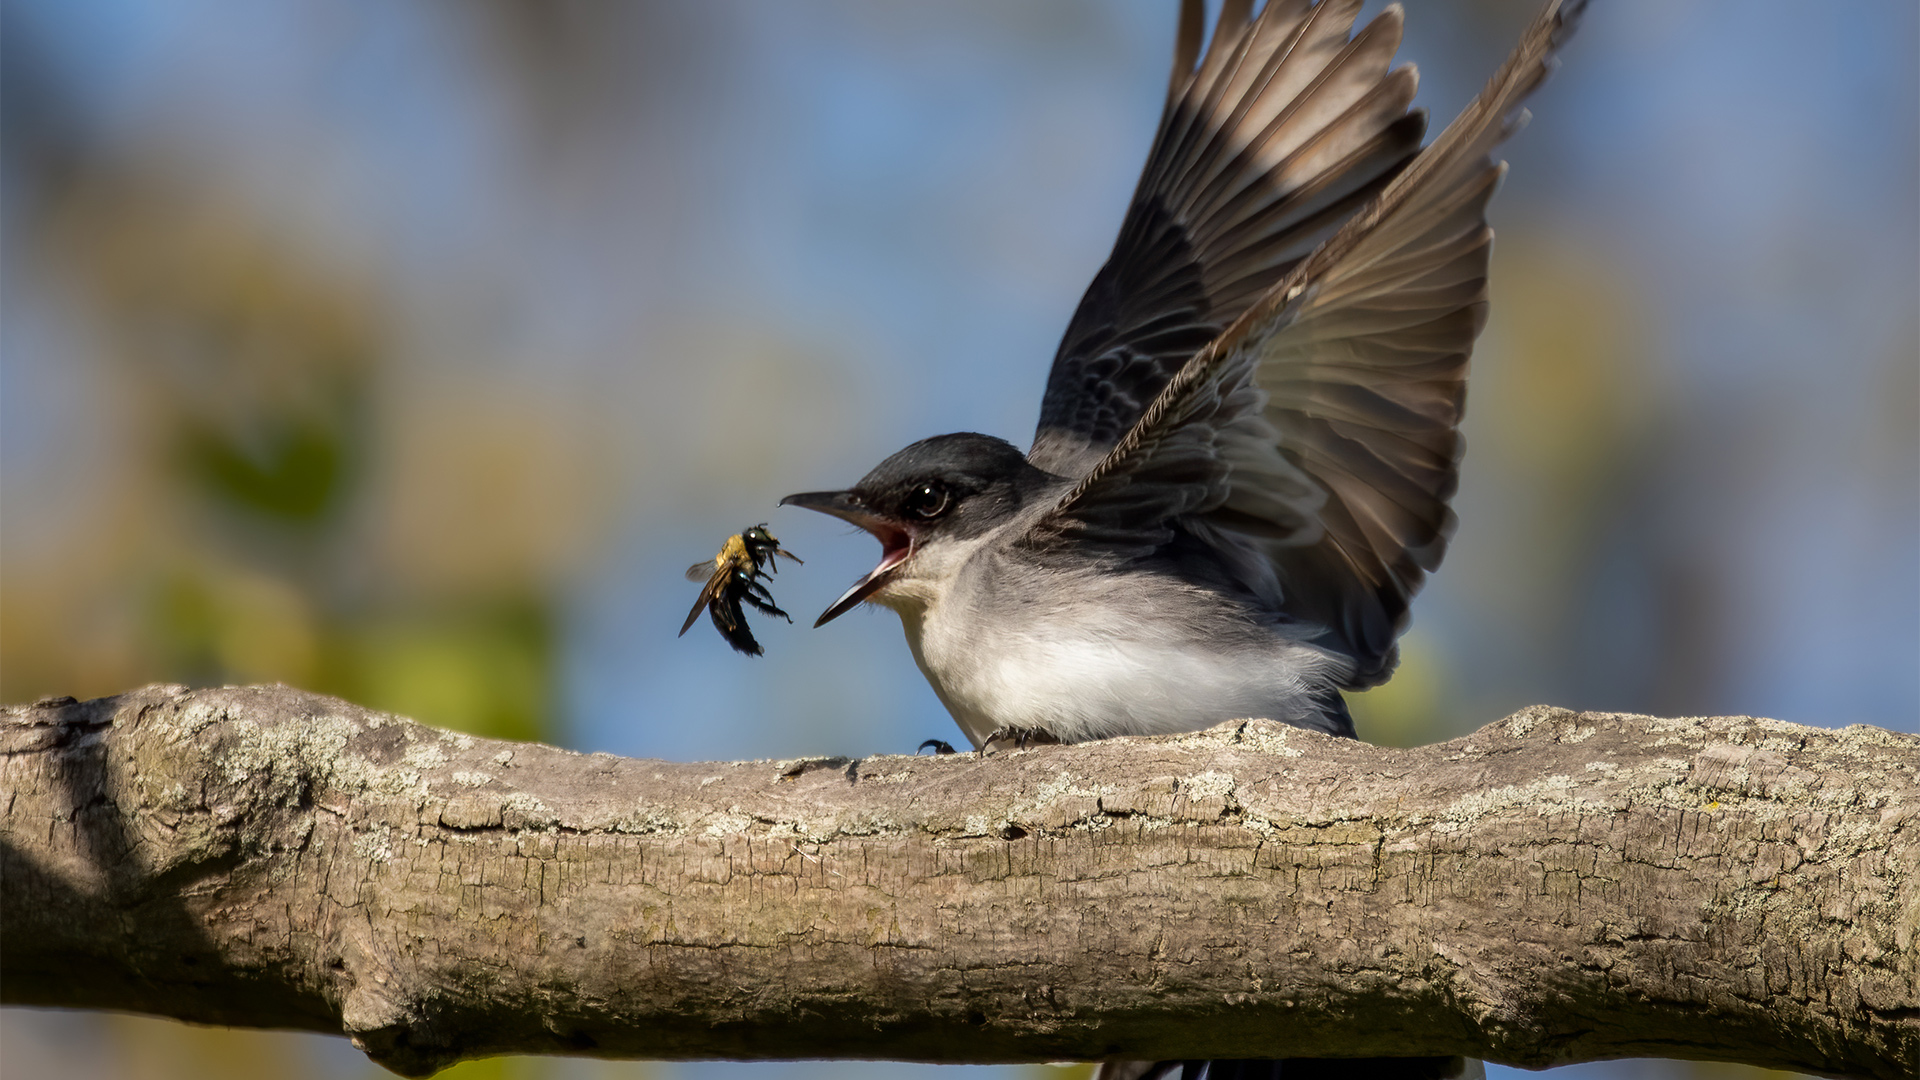 An Eastern Kingbird sitting on a thick branch has it's bill wide open as it's about to eat a bug.